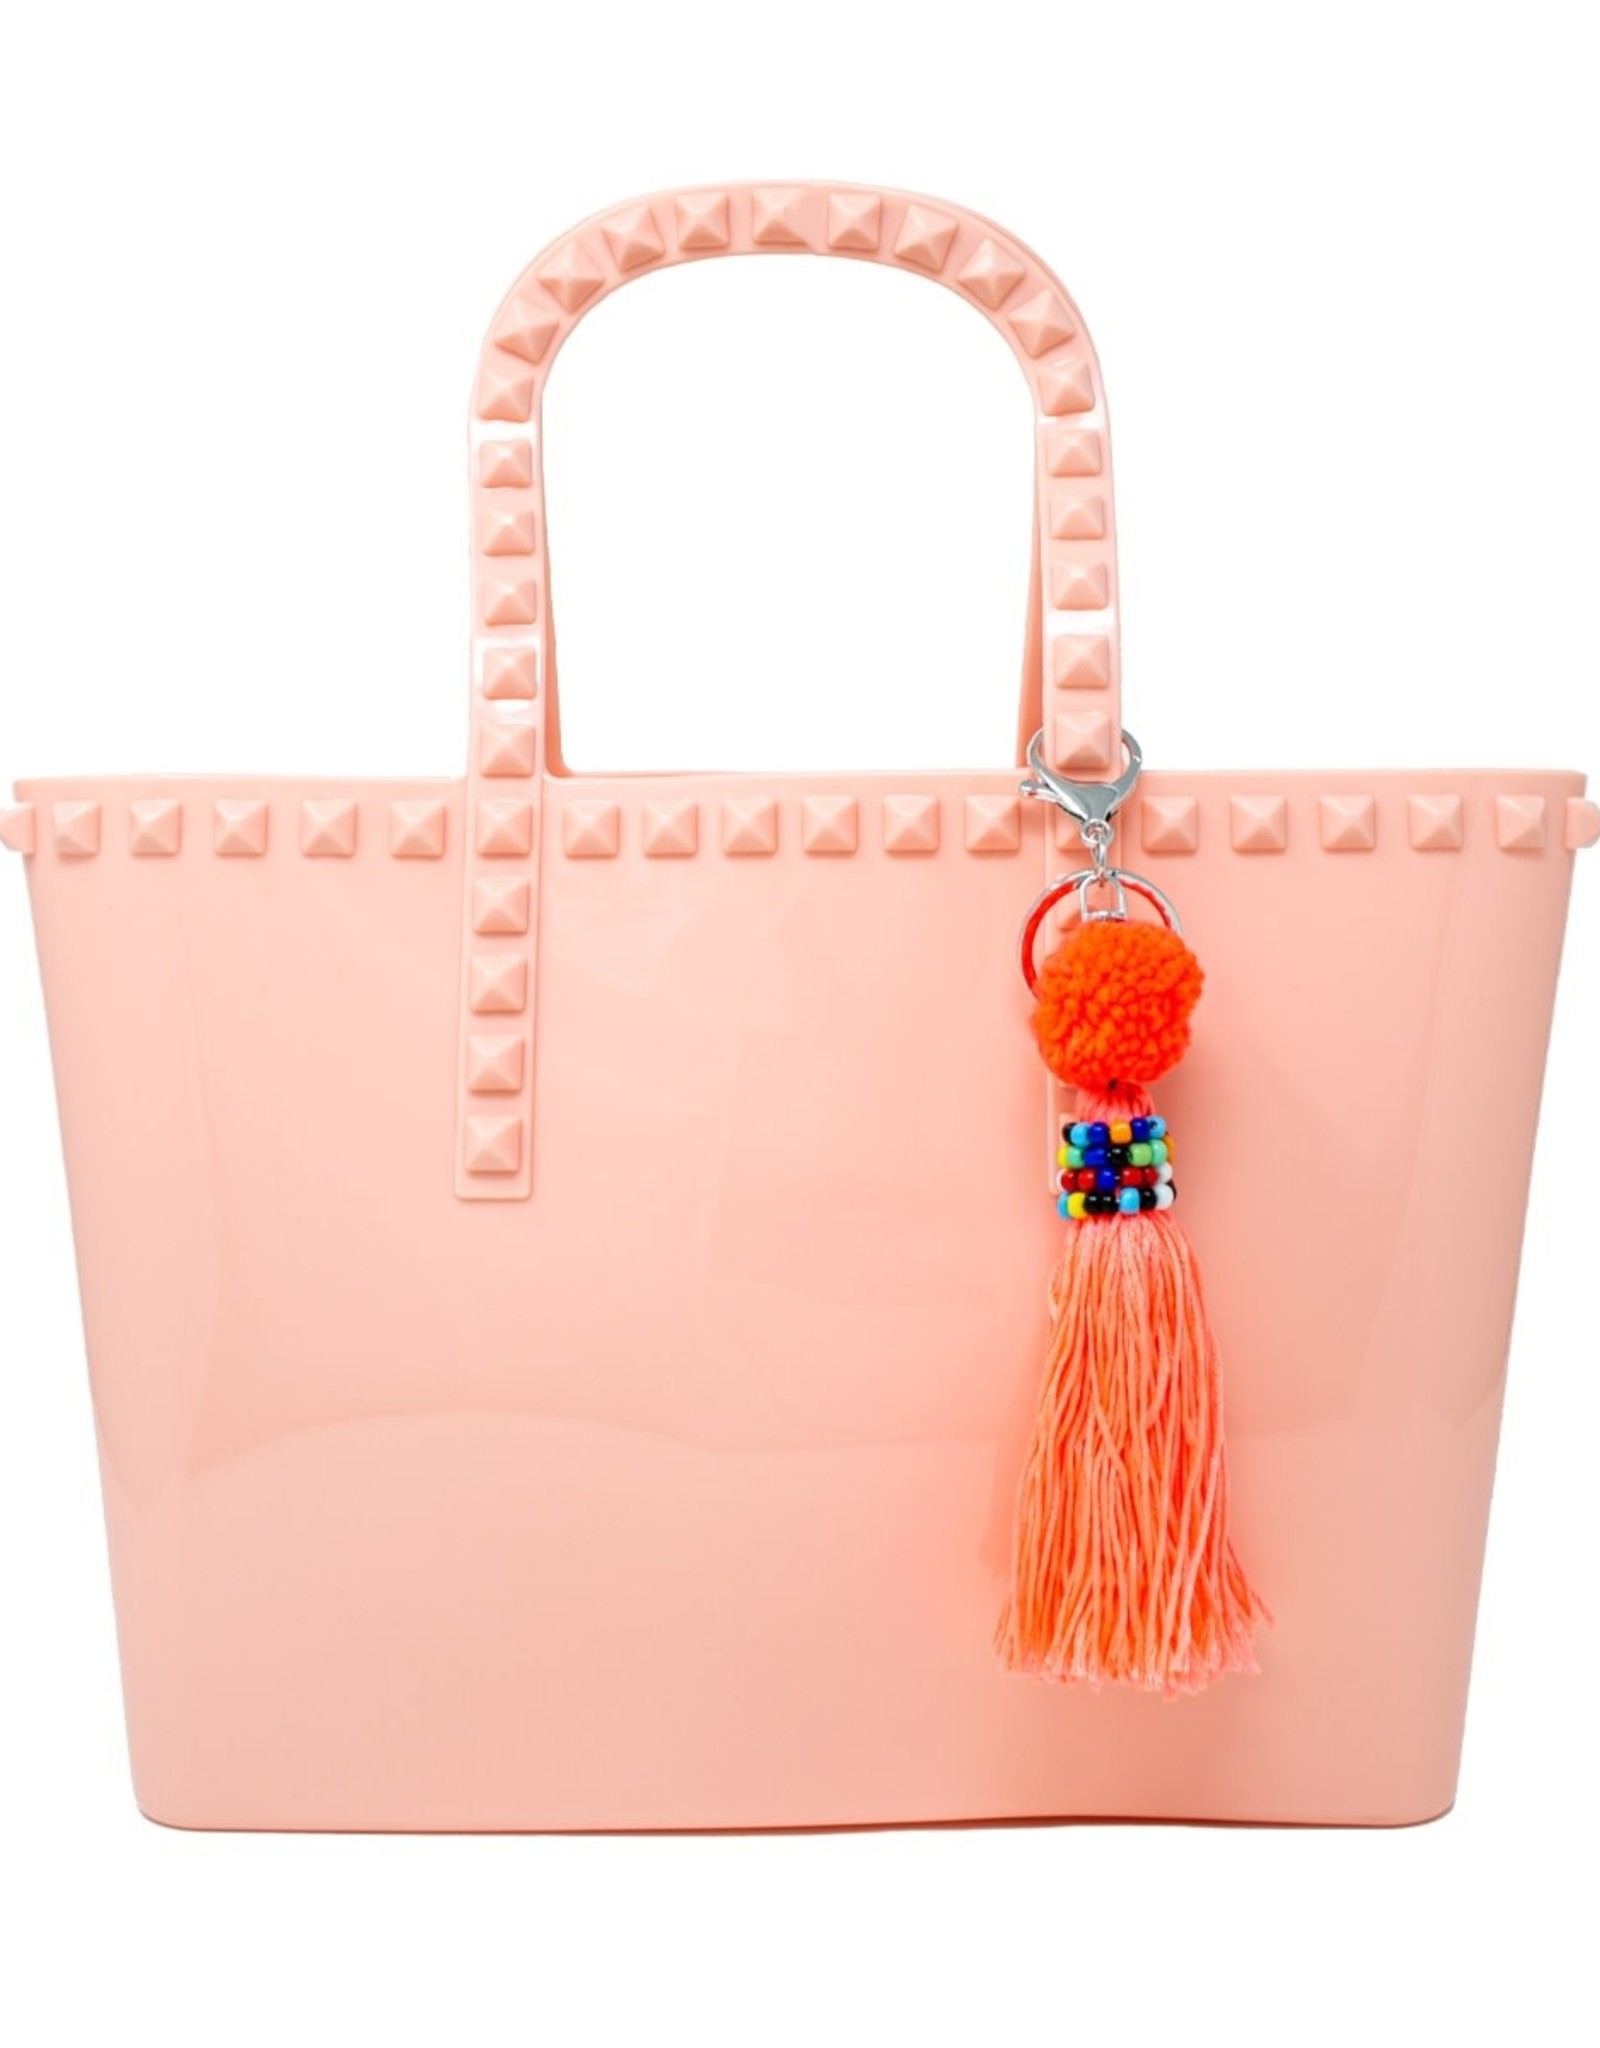 Zomi Gems Jumbo Jelly Tote Bag in Pink